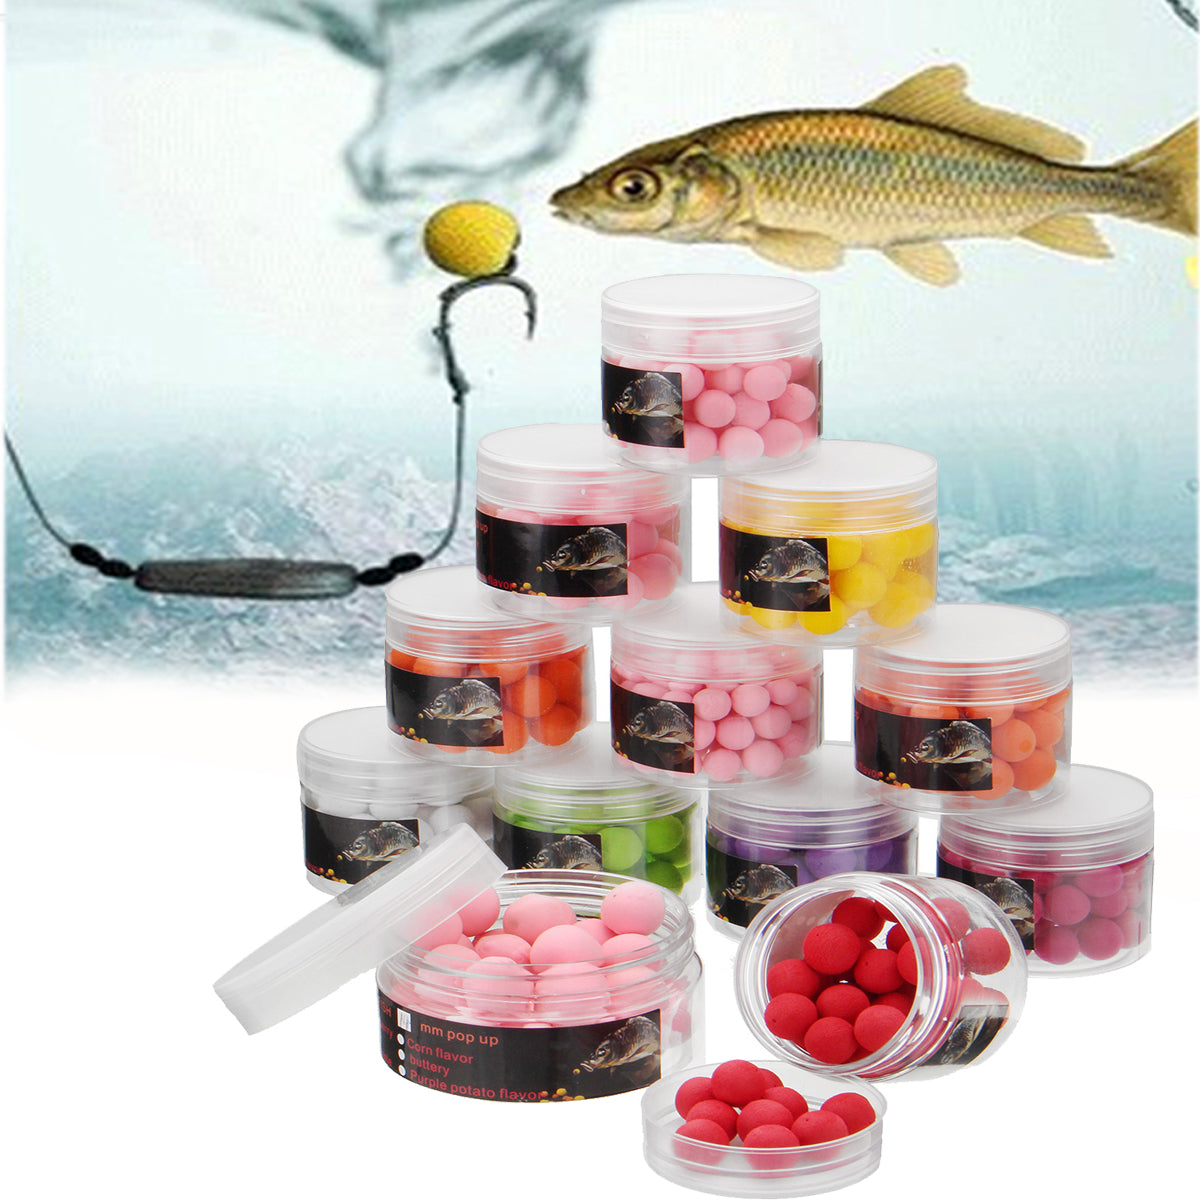 ZANLURE 8-14mm Course Carp Fishing Lures Pop Ups Baits 9 Colors 9 Flavours Floating Lure Ball Beads